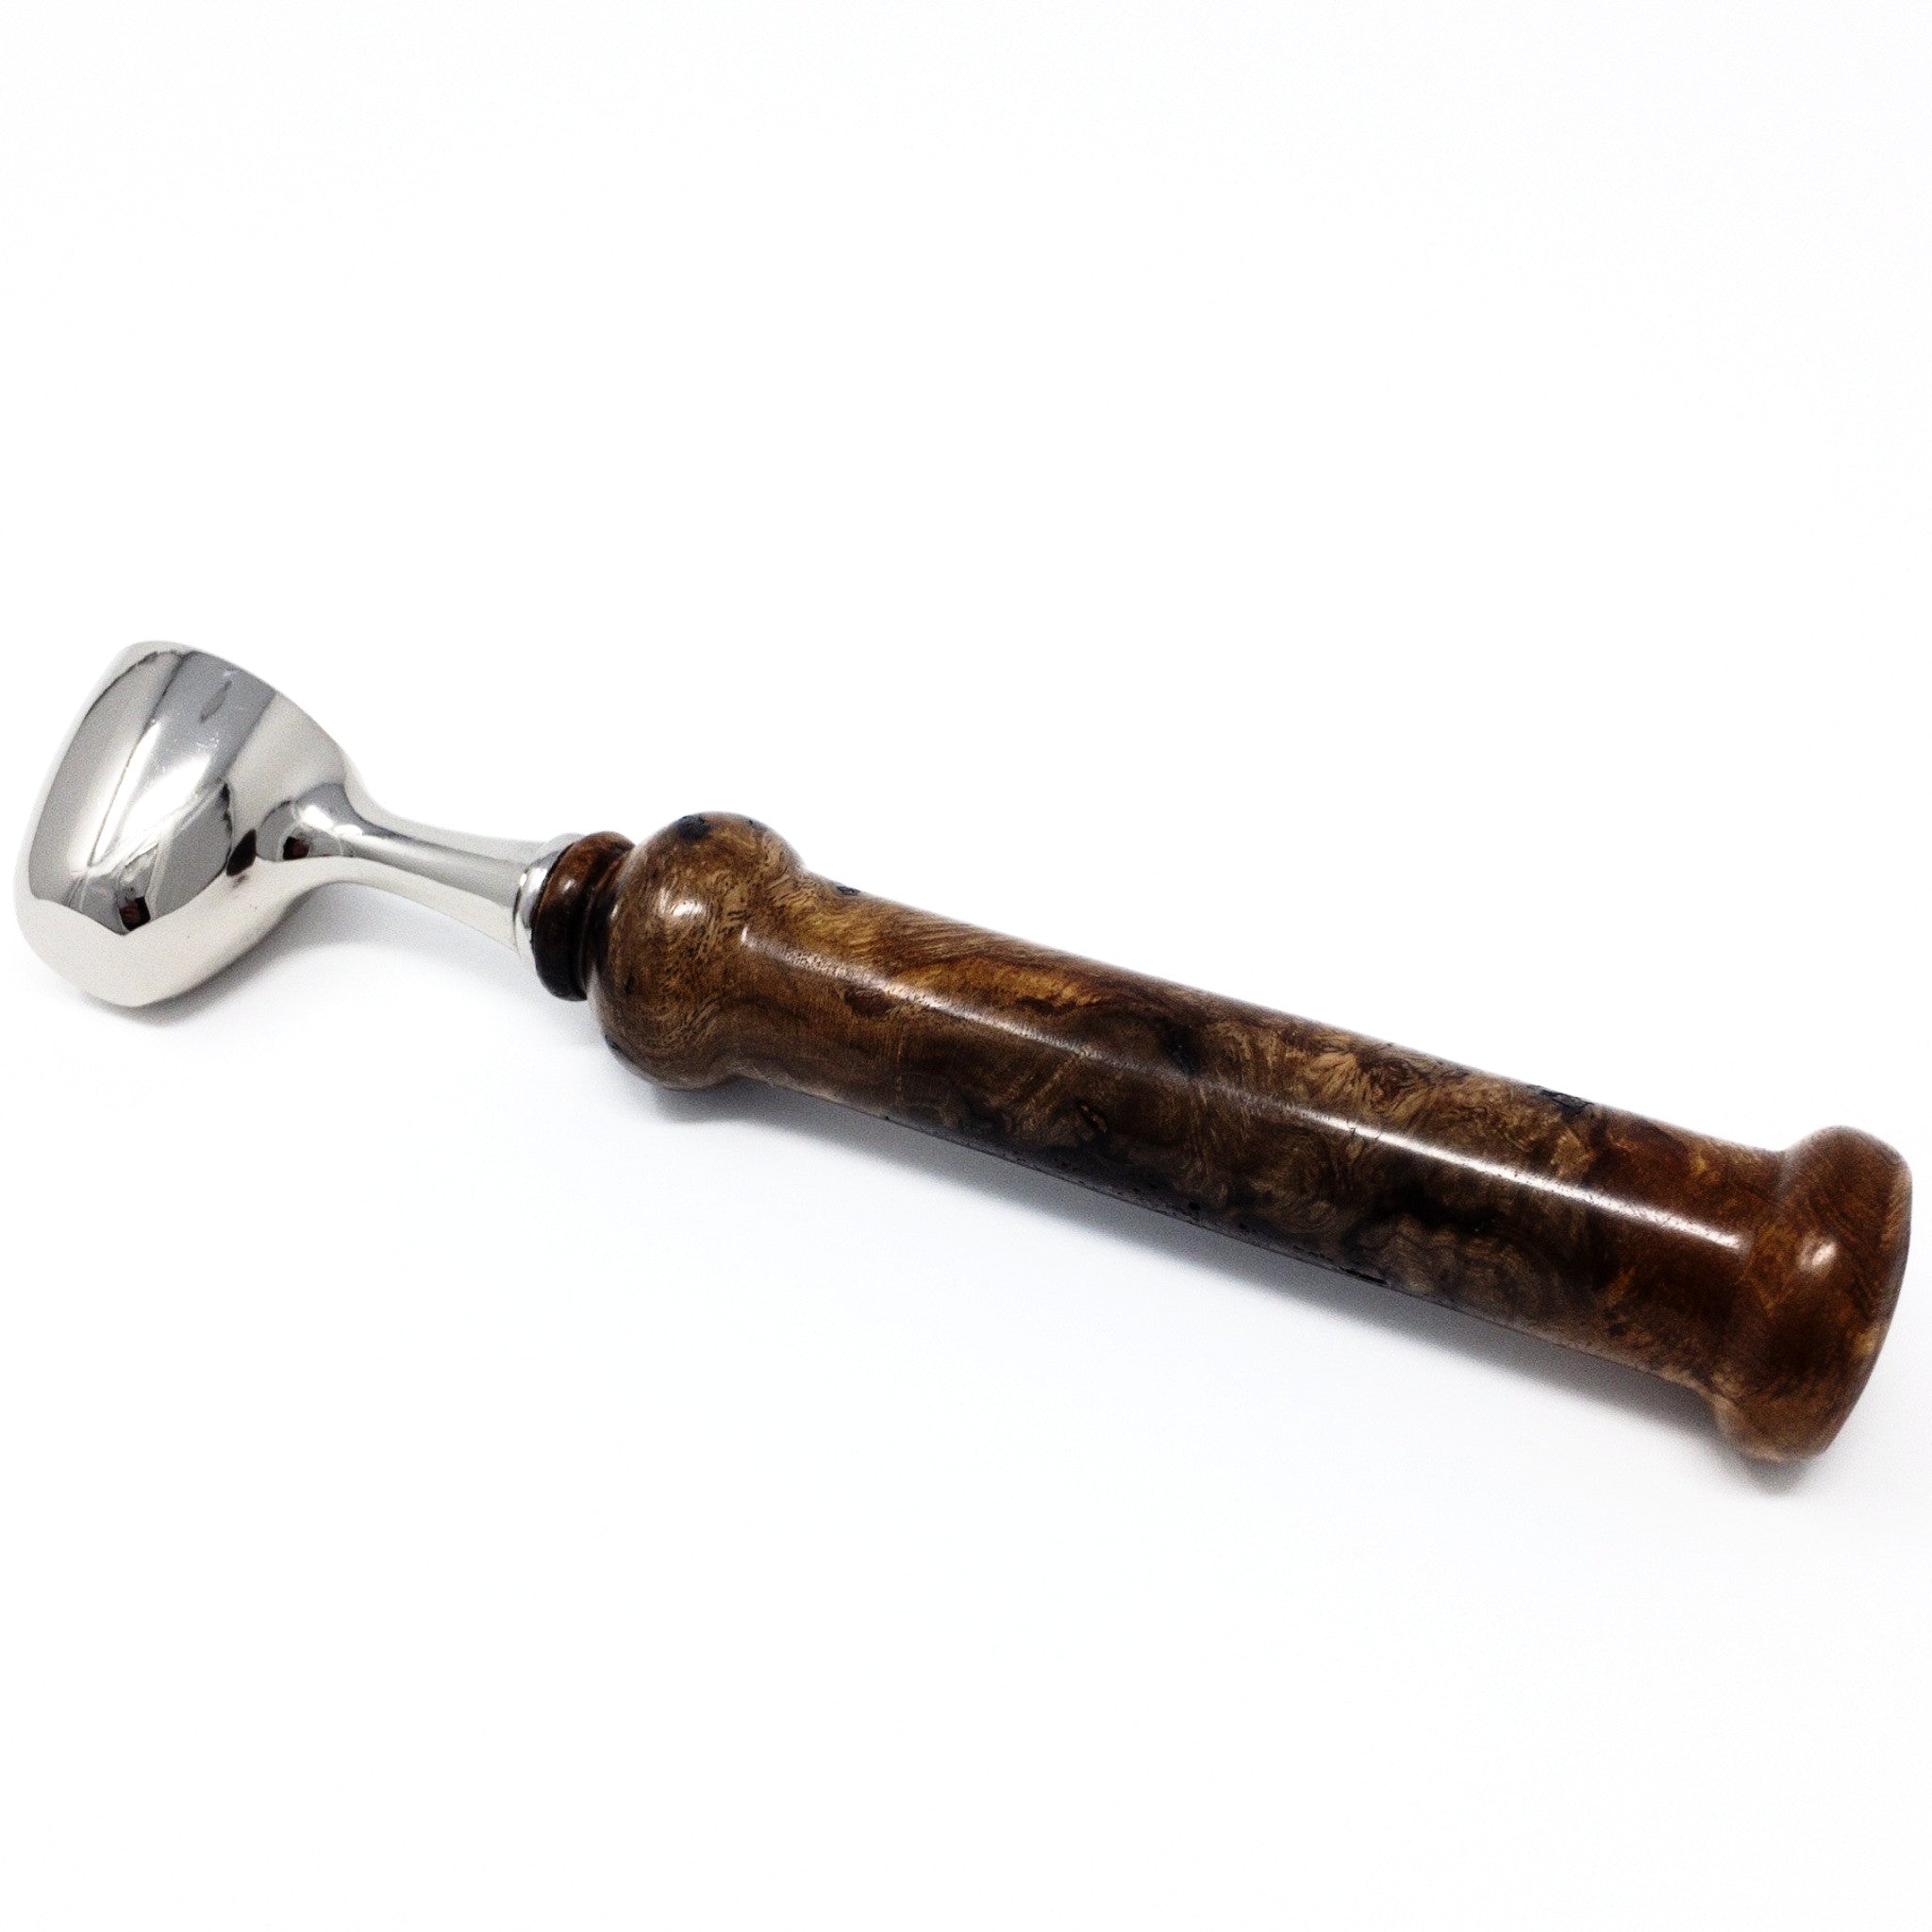 Chrome Coffee Scoop. Hand turned in Maple Burl Wood with stainless steel.  Perfect gift for a coffee lover.